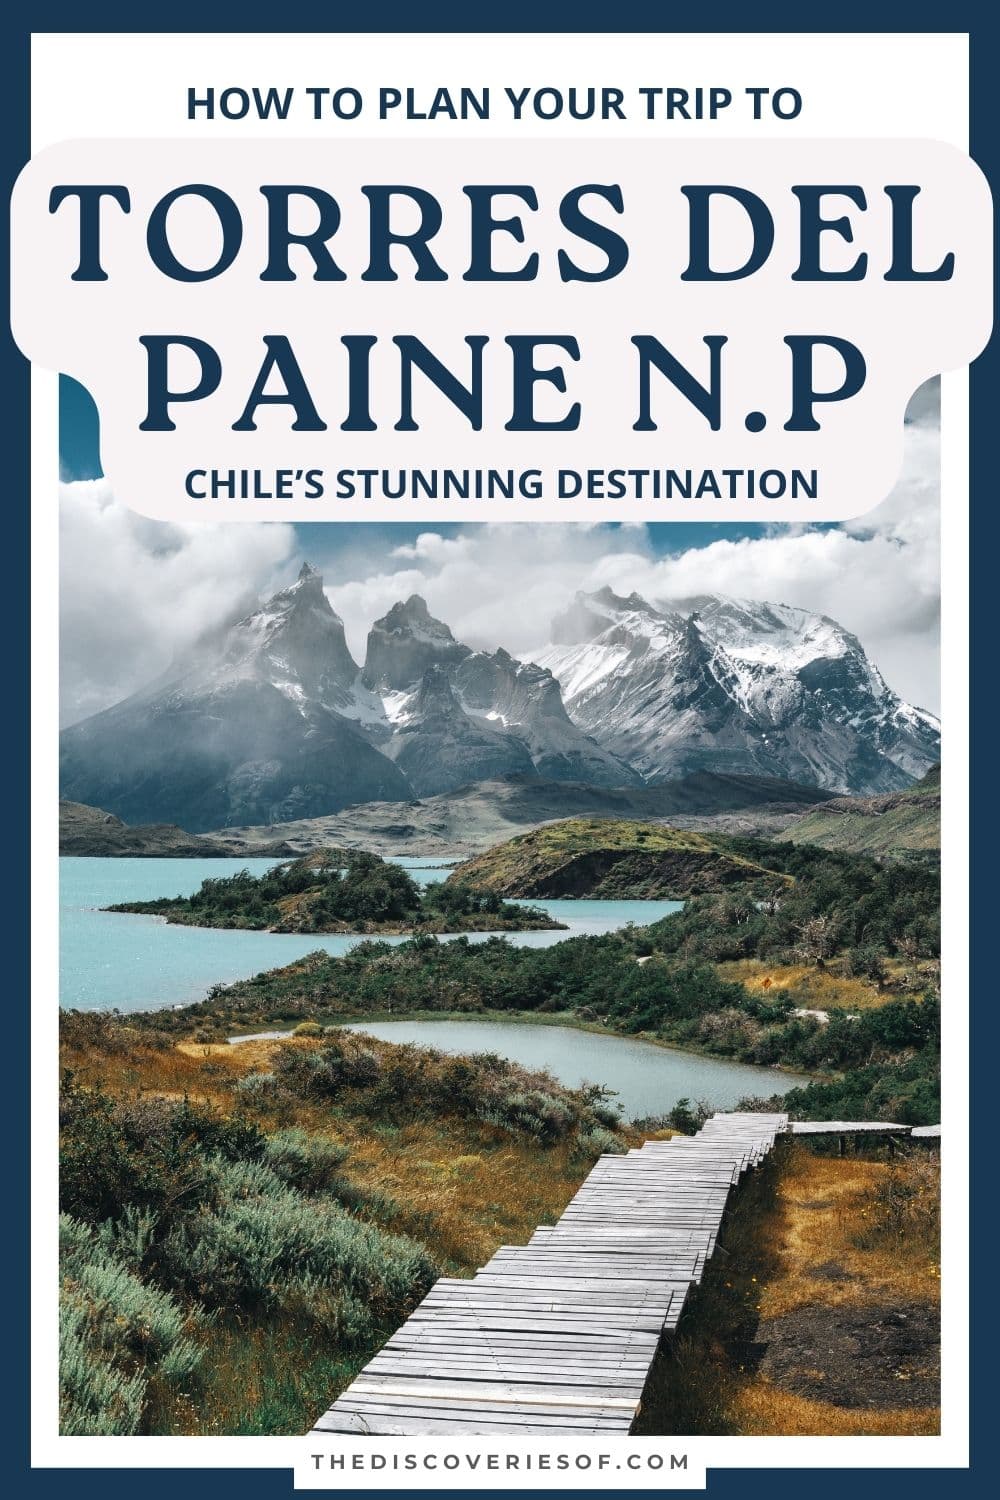 Torres del Paine W Trek Patagonia: A Step-by-Step Hiking Guide